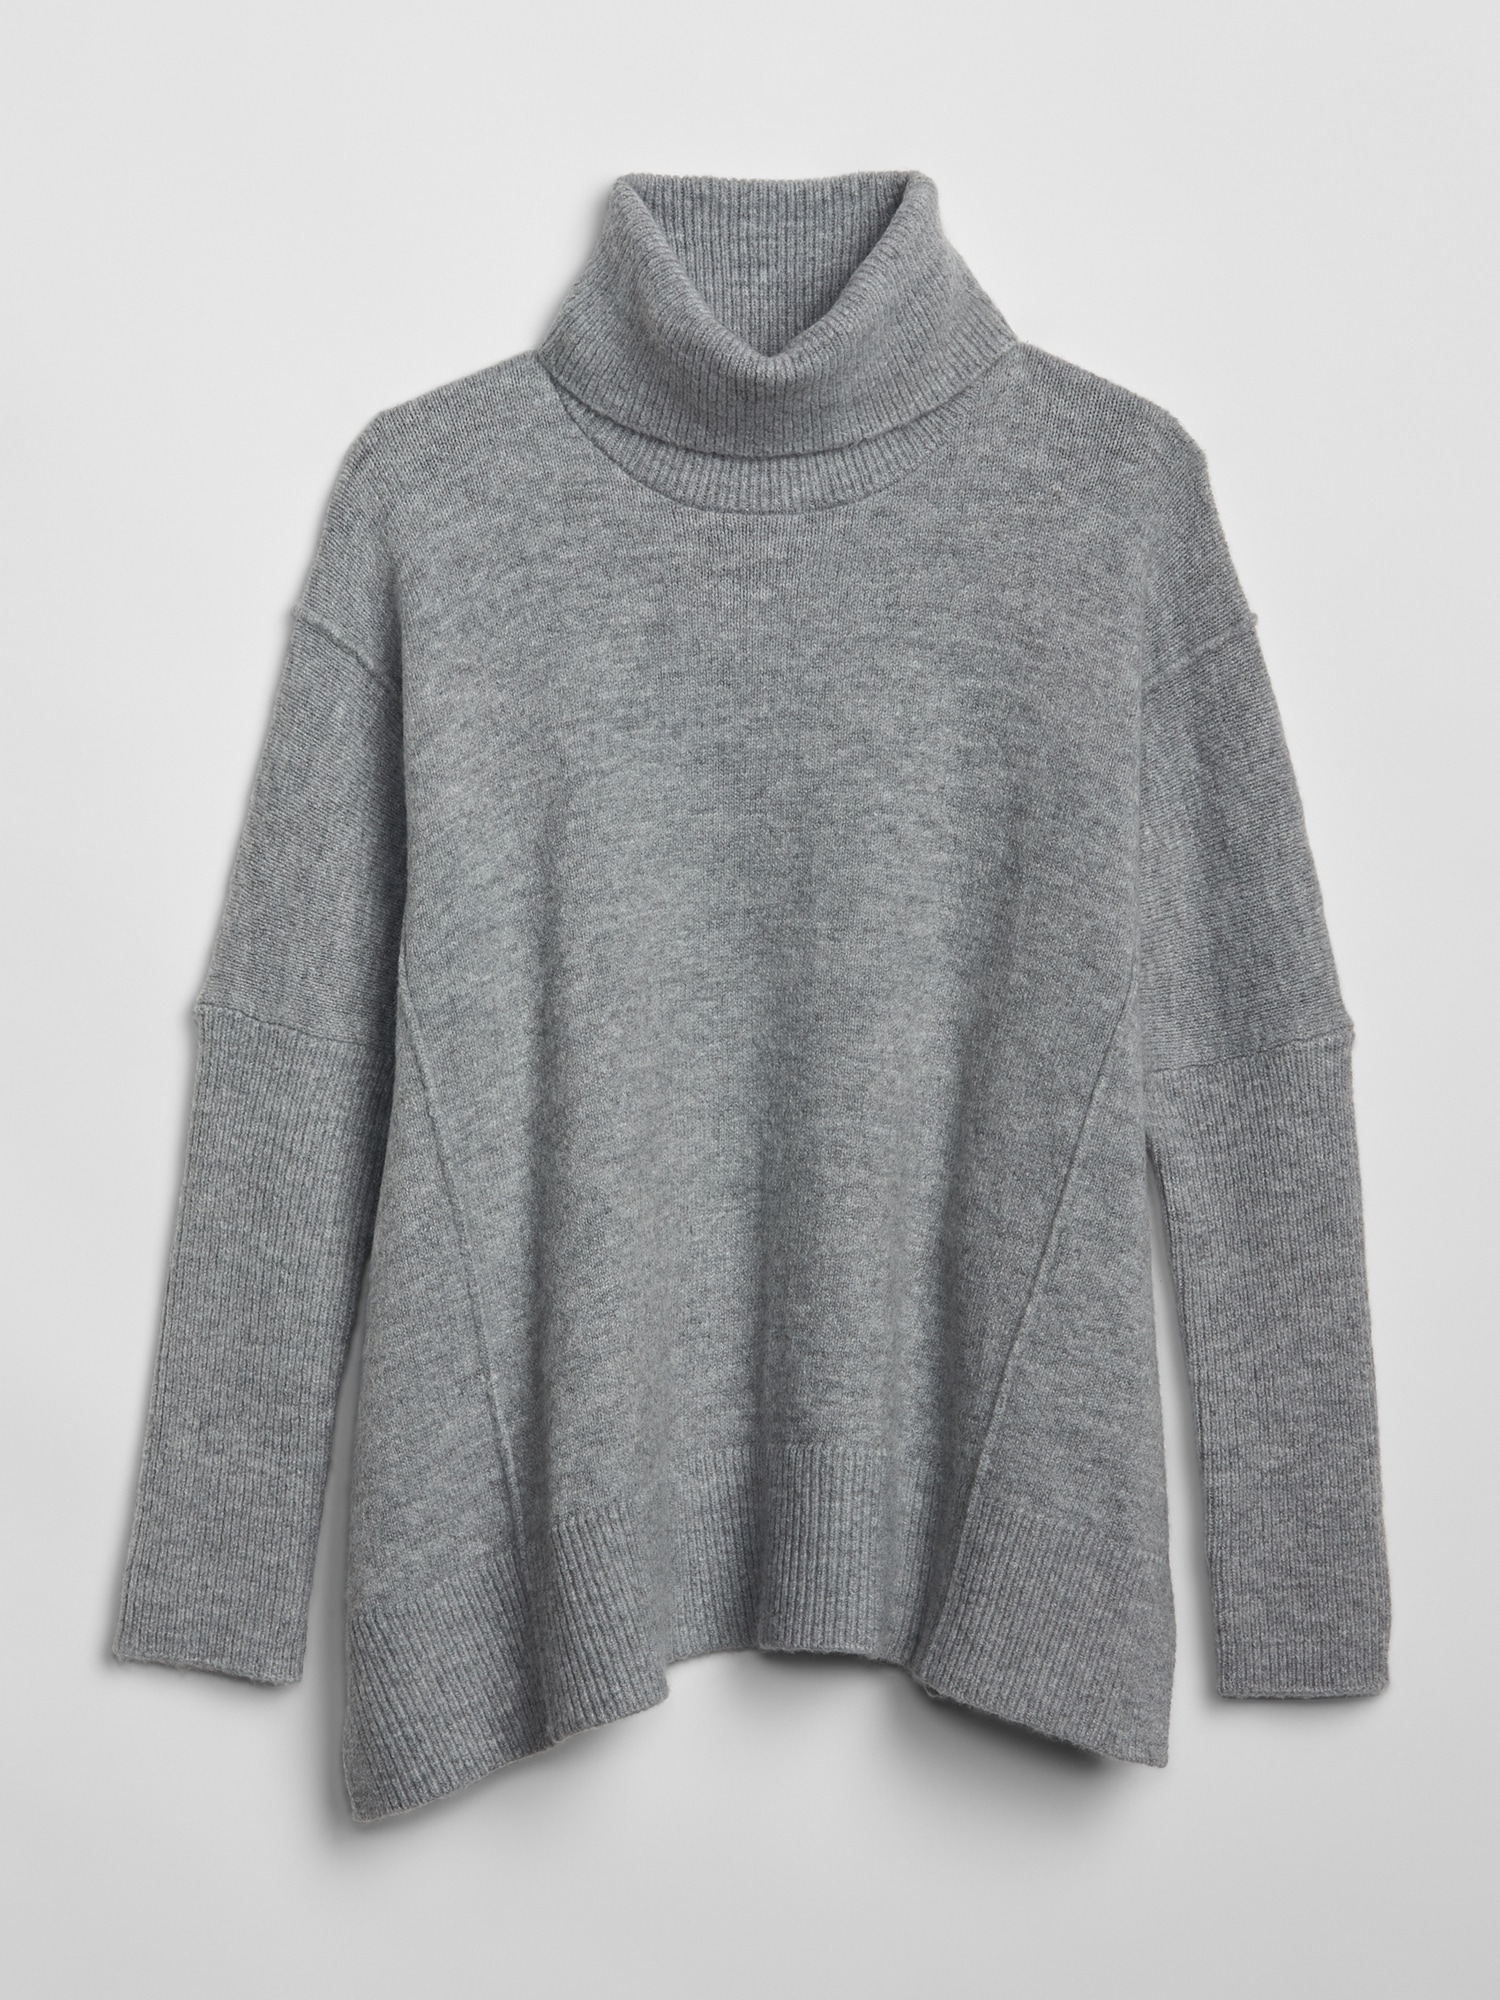 High Neck Oversize Knitted Poncho In Grey, Jenerique